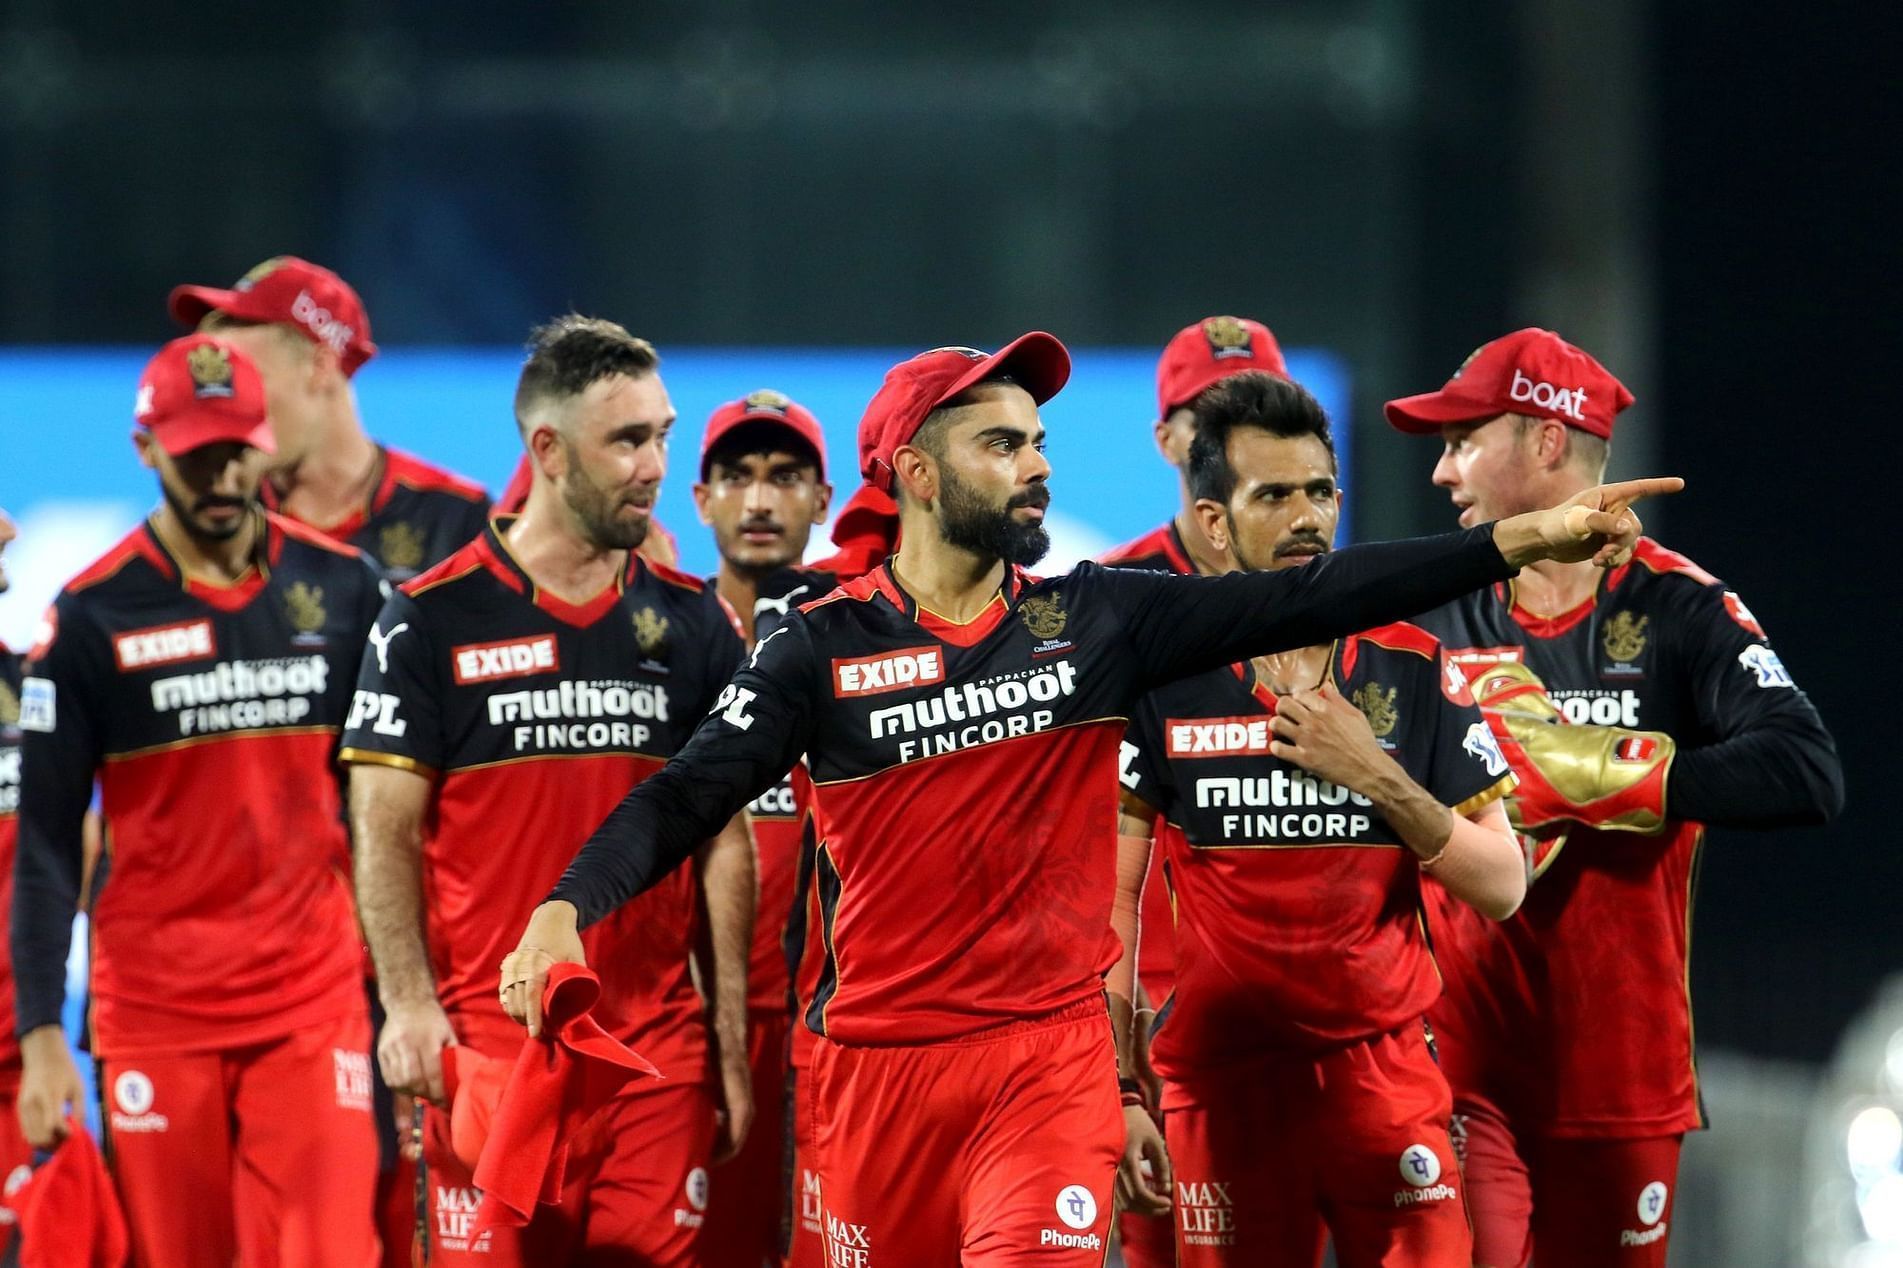 RCB are known to promote young talent